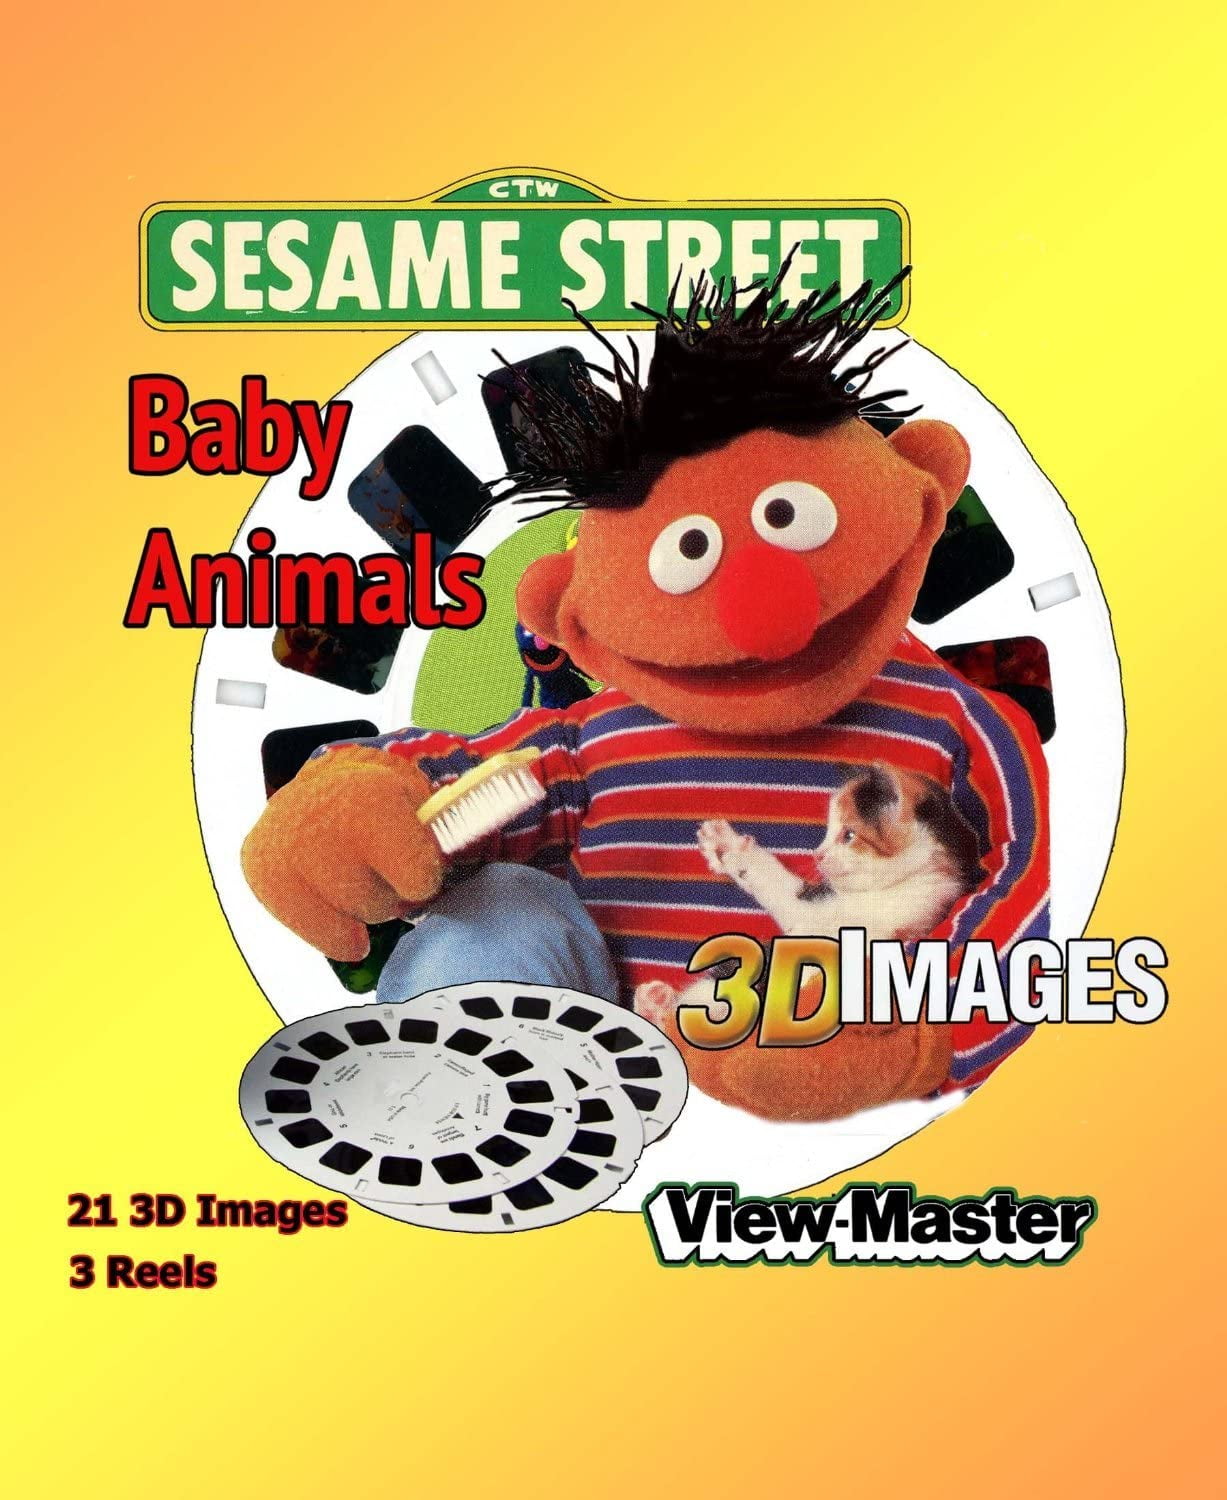 21 3D Images by 3Dstereo ViewMaster ViewMaster Sesame Street Baby Animals View-Master 3 Reel Set 